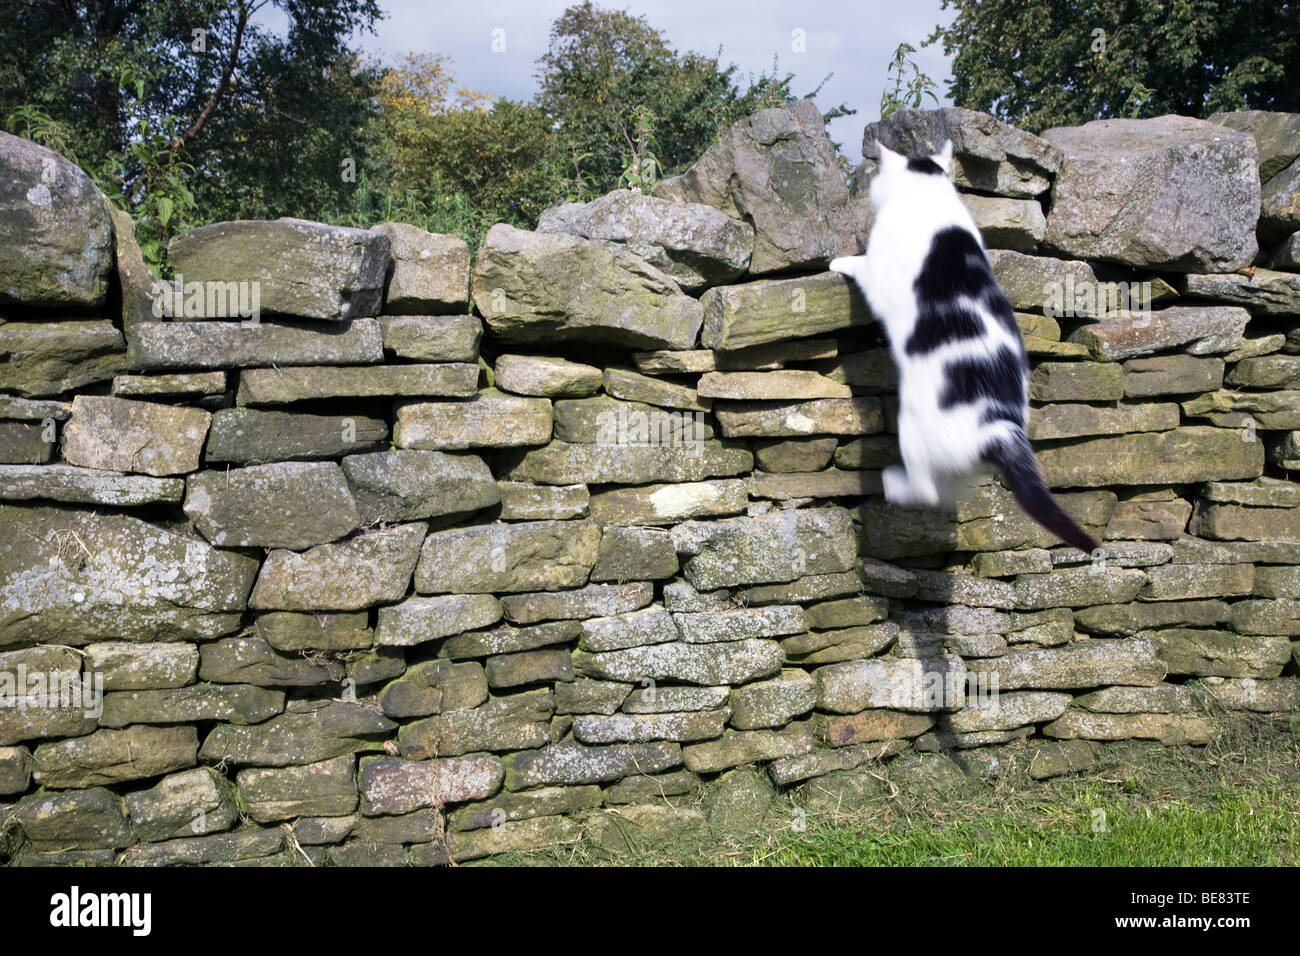 A DRY STONE WALL WITH A CAT JUMPING UP IN Haworth, BRONTE COUNTRY. LINCOLNSHIRE Stock Photo